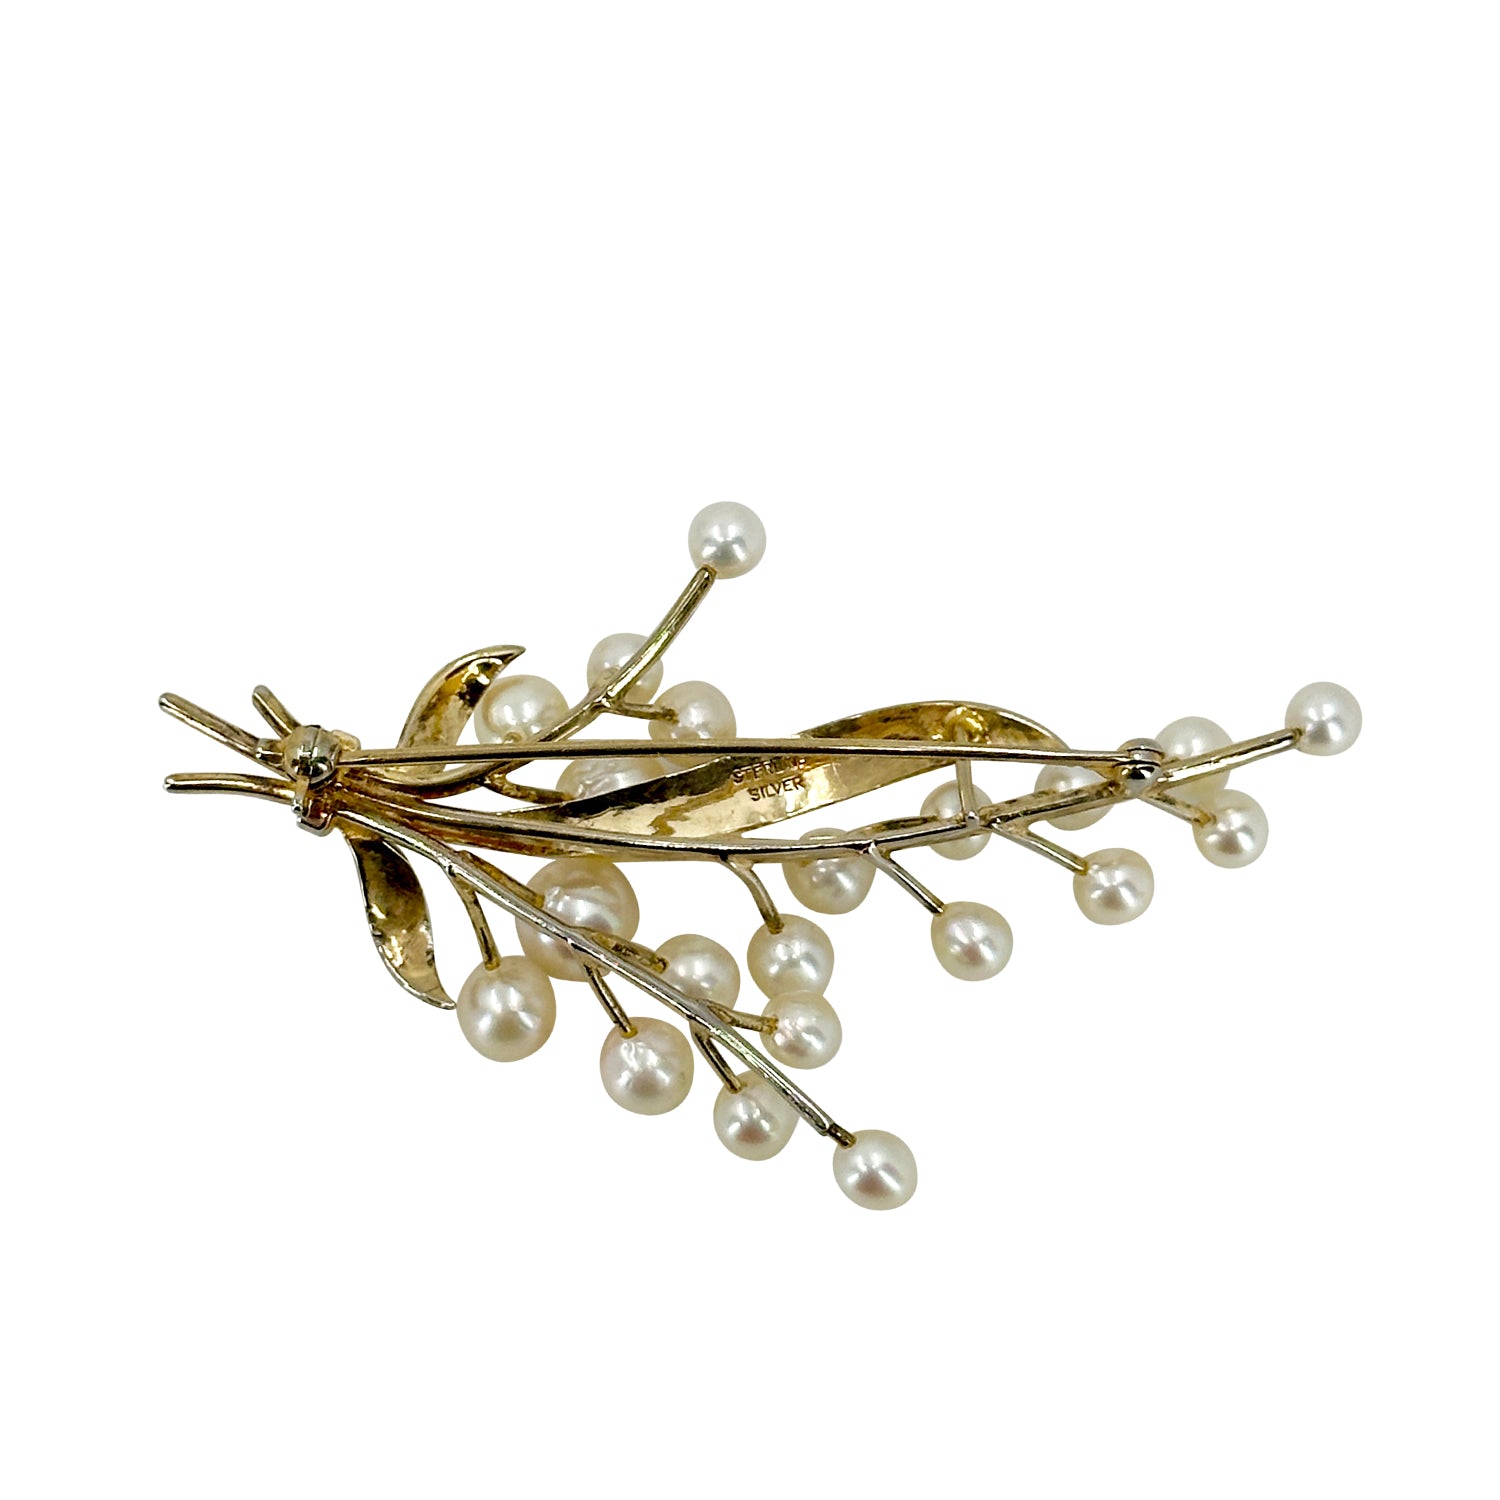 Engraved Branch Japanese Saltwater Akoya Cultured Pearl Vintage Brooch Pin- Sterling Silver Gold Plate